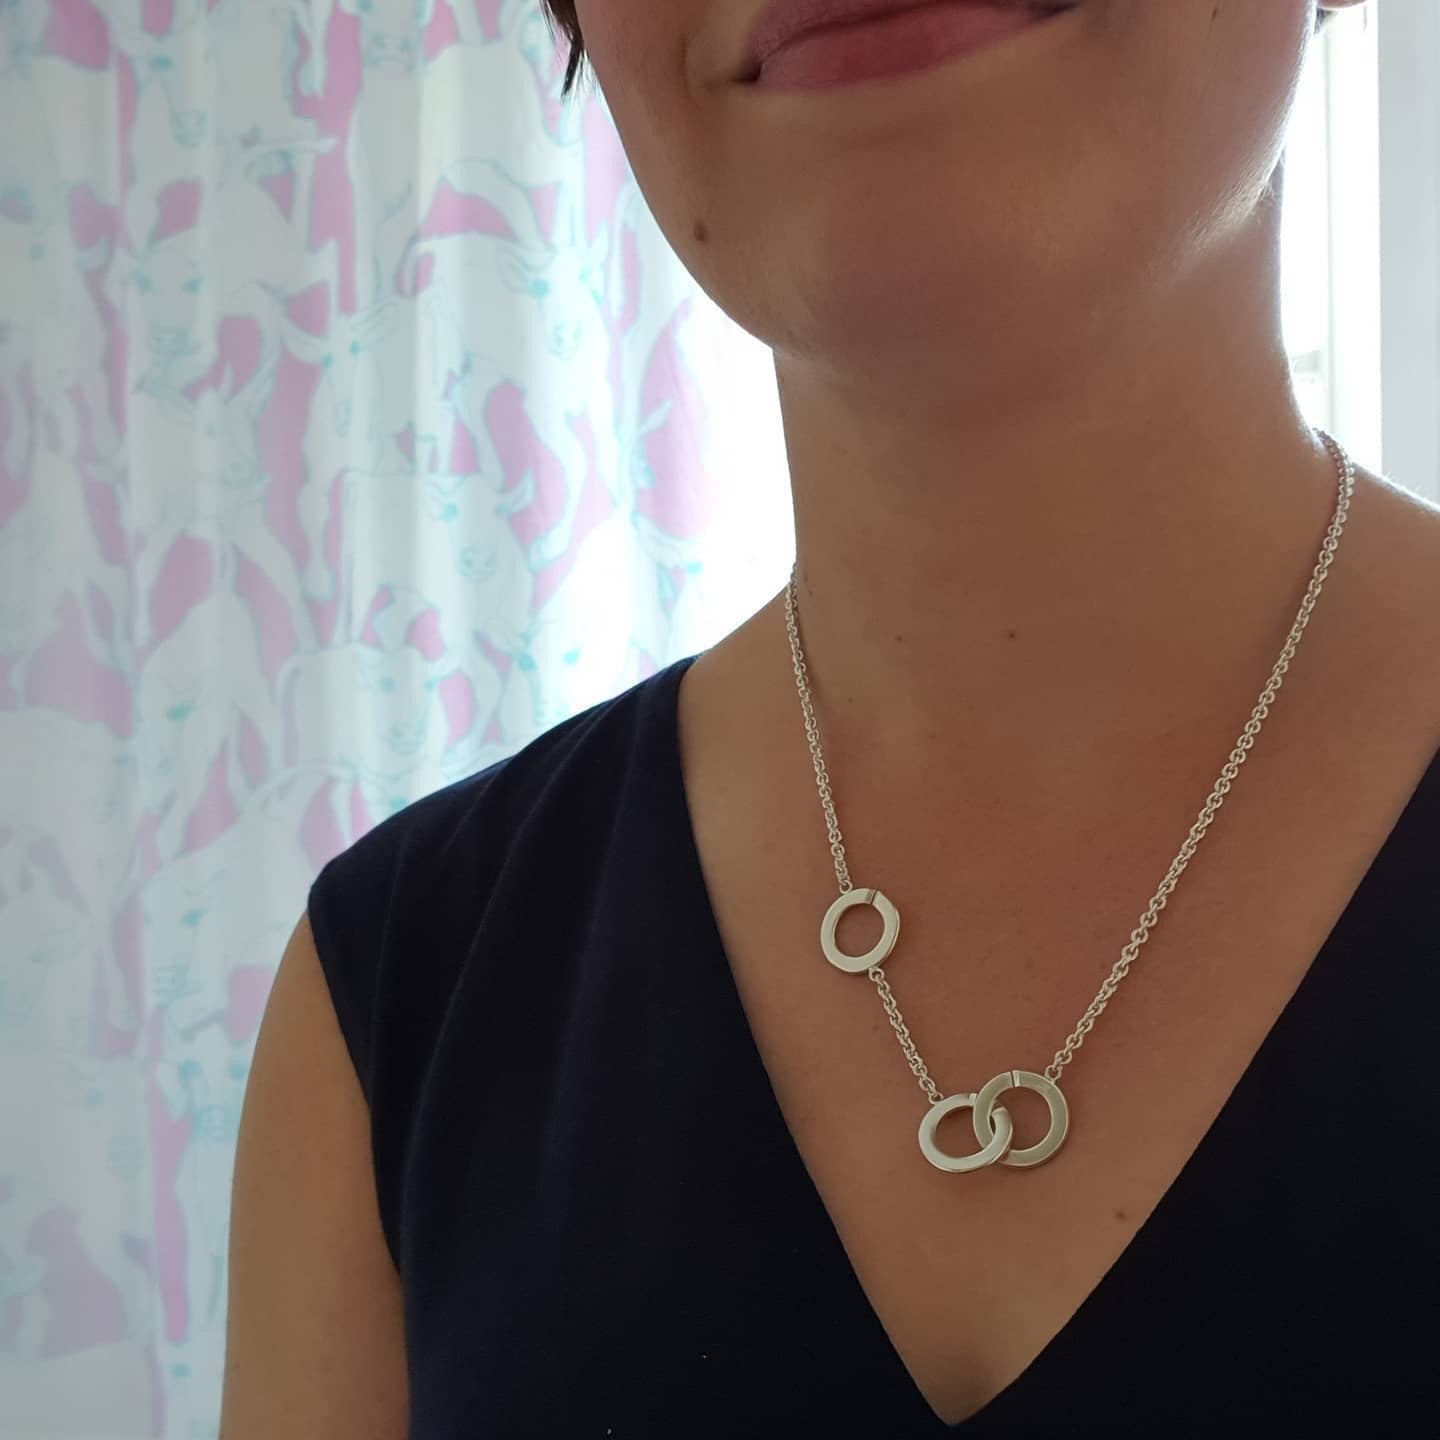 Bubbles necklace, TWO uses